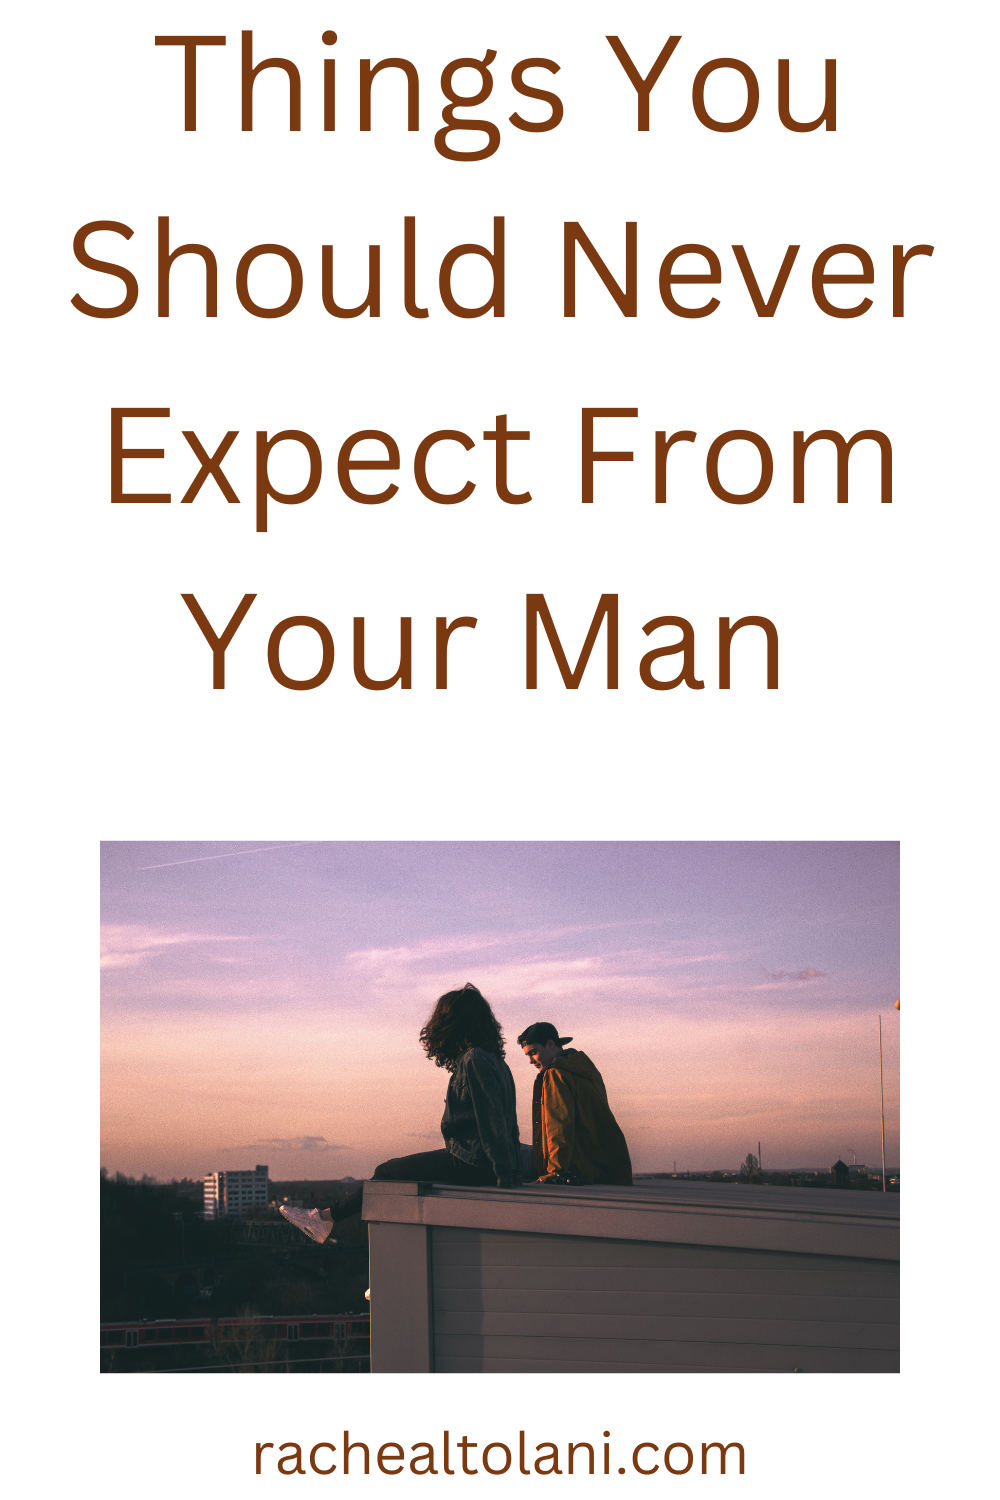 Things you should never expect from your man